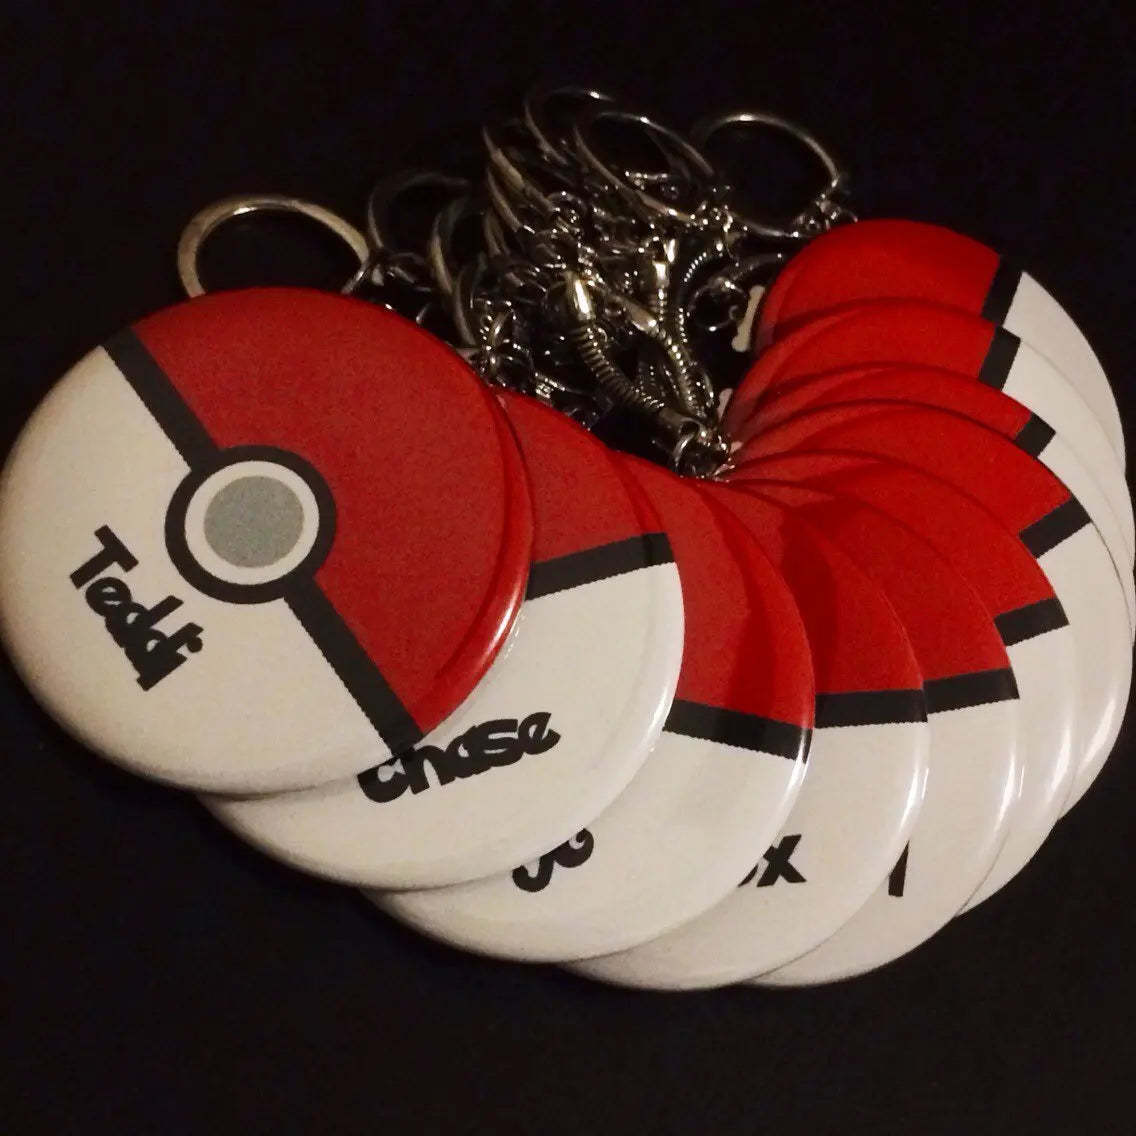 Pokemon Generic Favours Button - Pokemon Party - Pokeball Button Pins, Keychains or Magnets 10 pieces